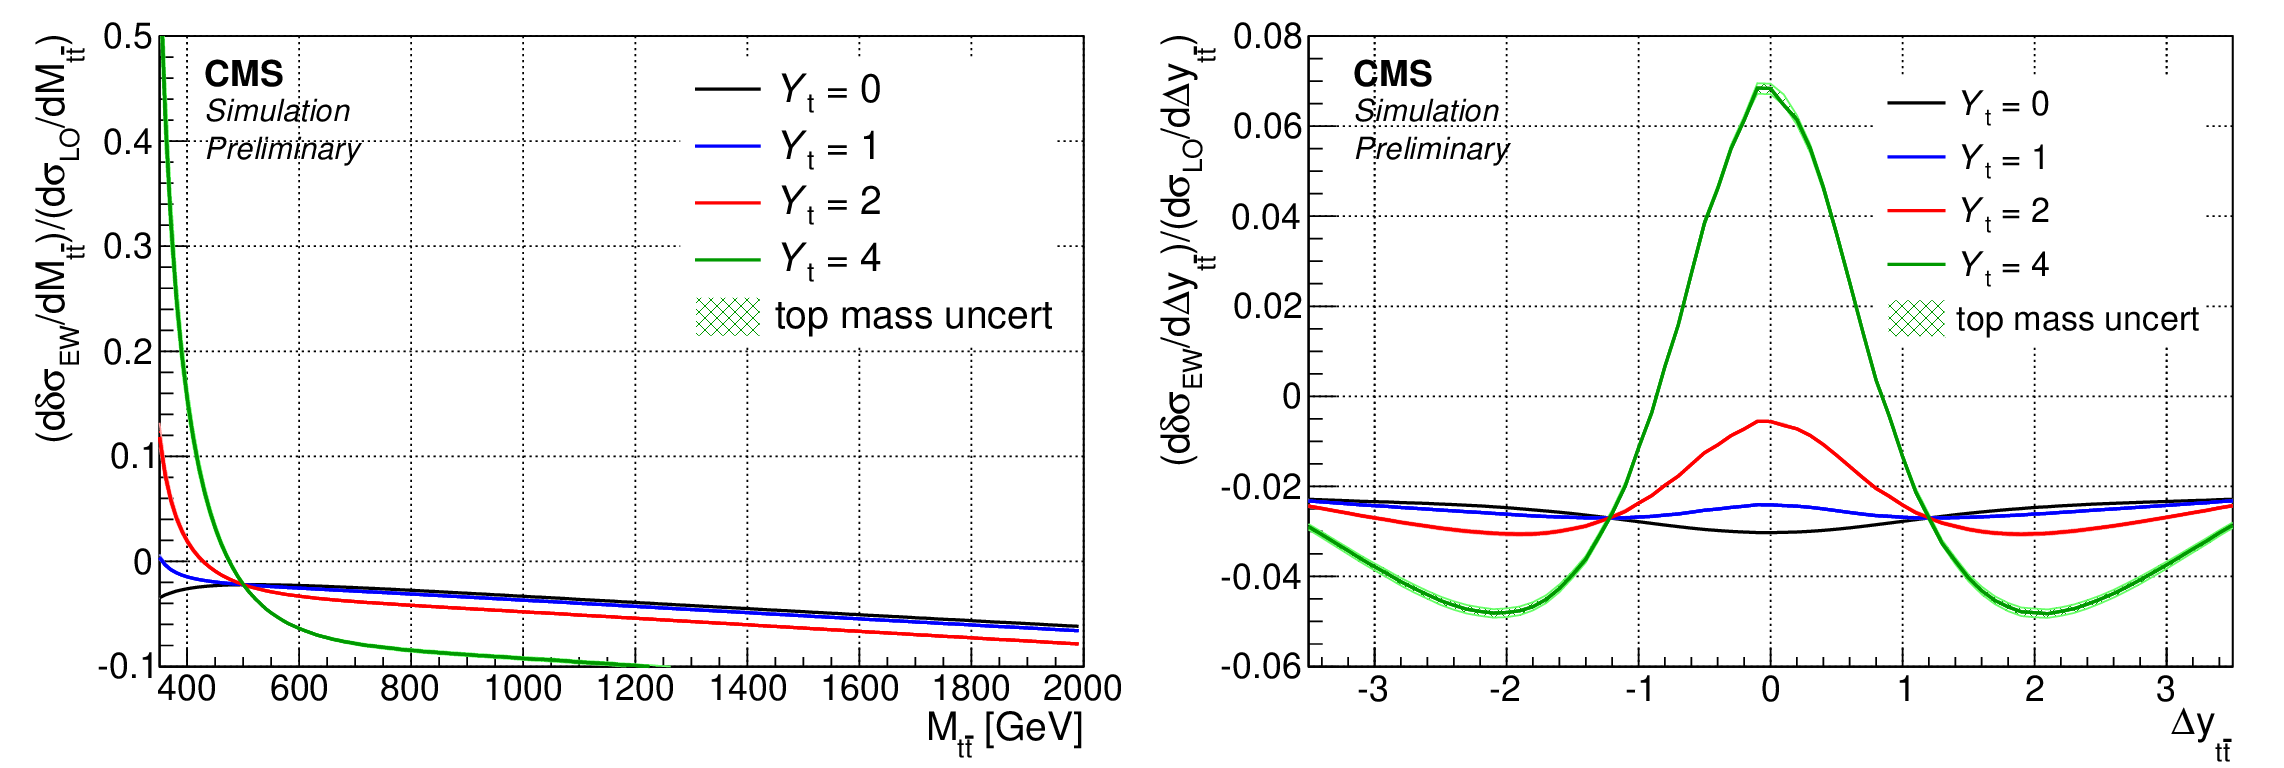 Probability of the top quark-antiquark production vs kinematic properties of the system for different values of the top Yukawa coupling (Yt=0,1,2,4). Left: Invariant mass of the system (lowest value of this variable corresponds to the production threshold).  Right: Rapidity dif-ference between top quark and antiquark (this variable is related to the angle between the two particles). The narrow bands around the lines indicate the variations of the prediction with the top quark mass.